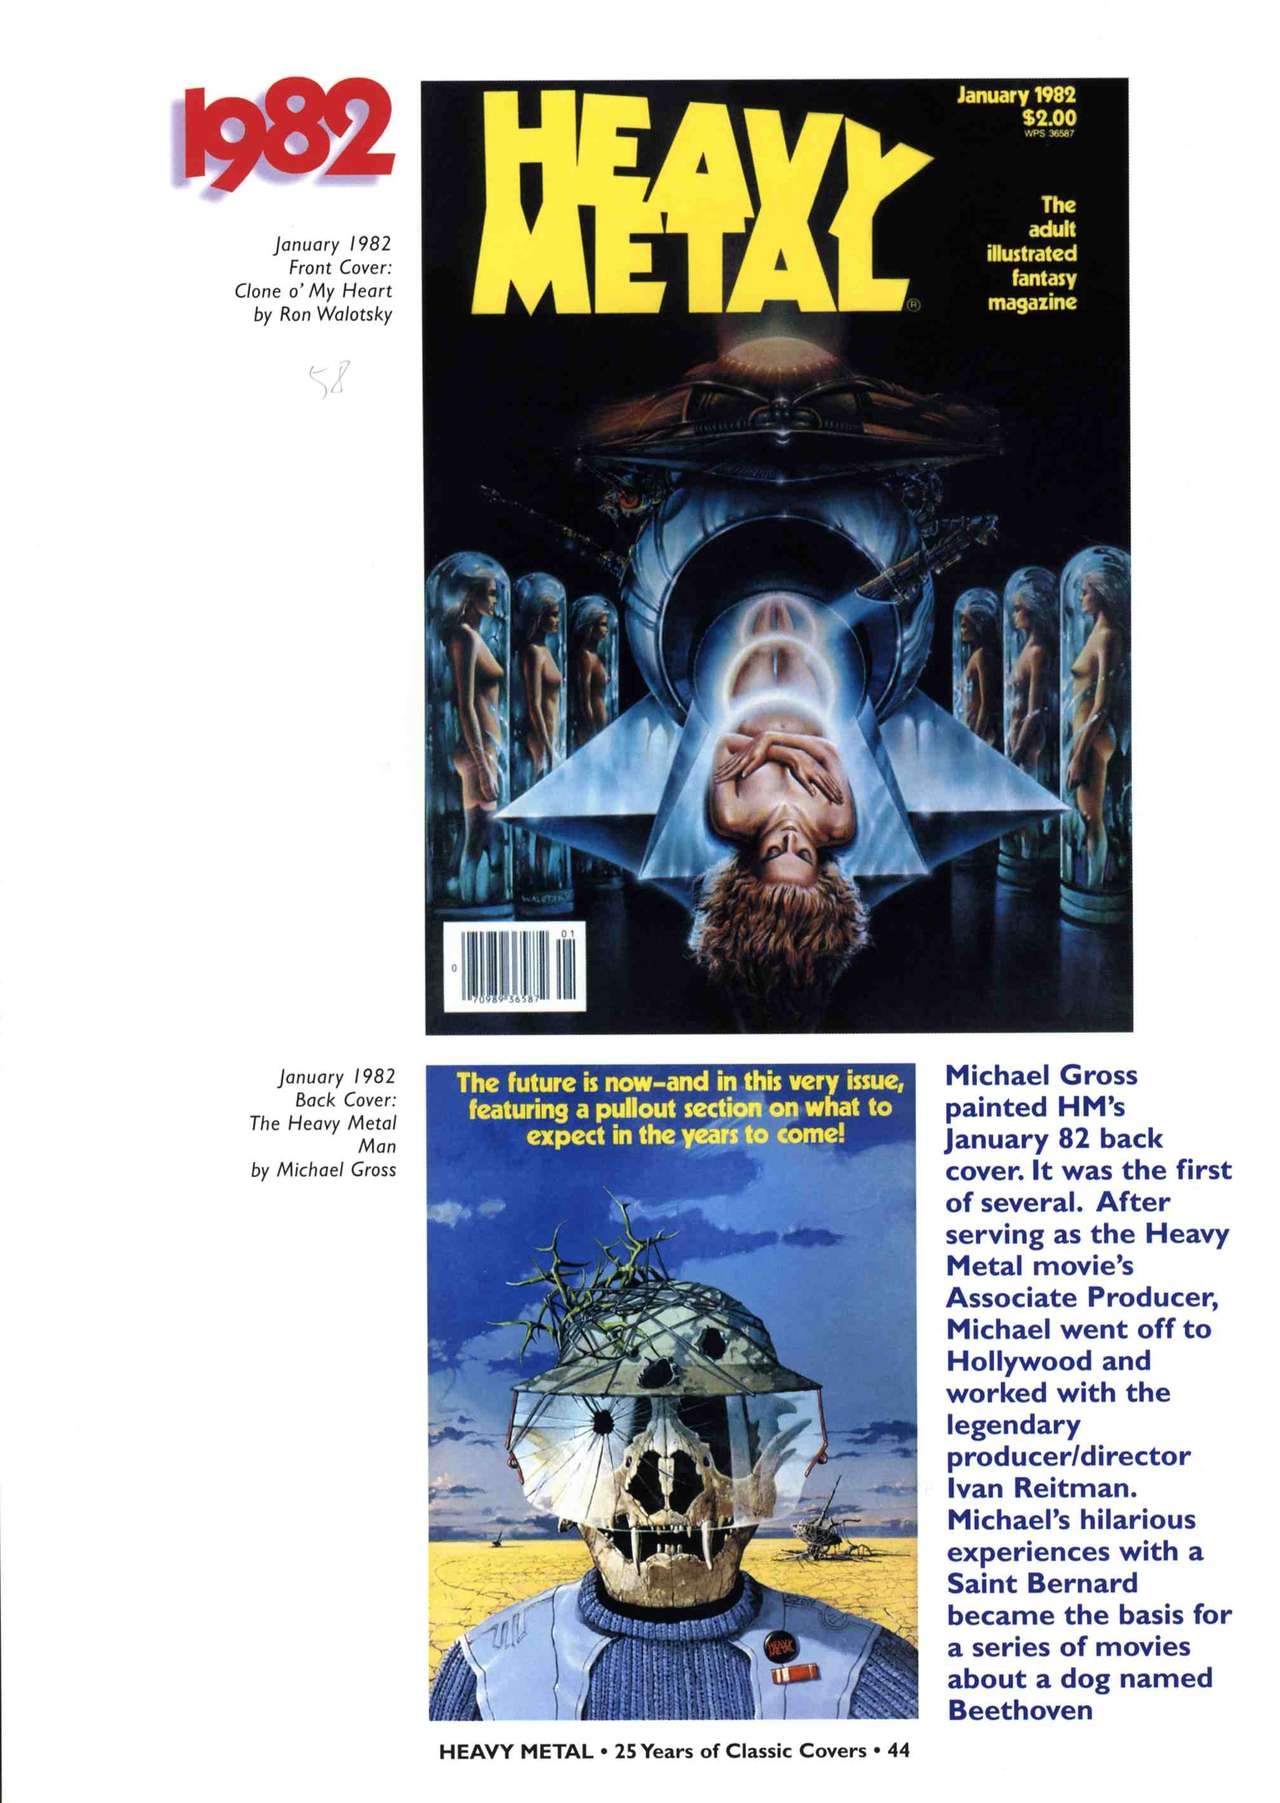 HEAVY METAL 25 Years of Classic Covers 49